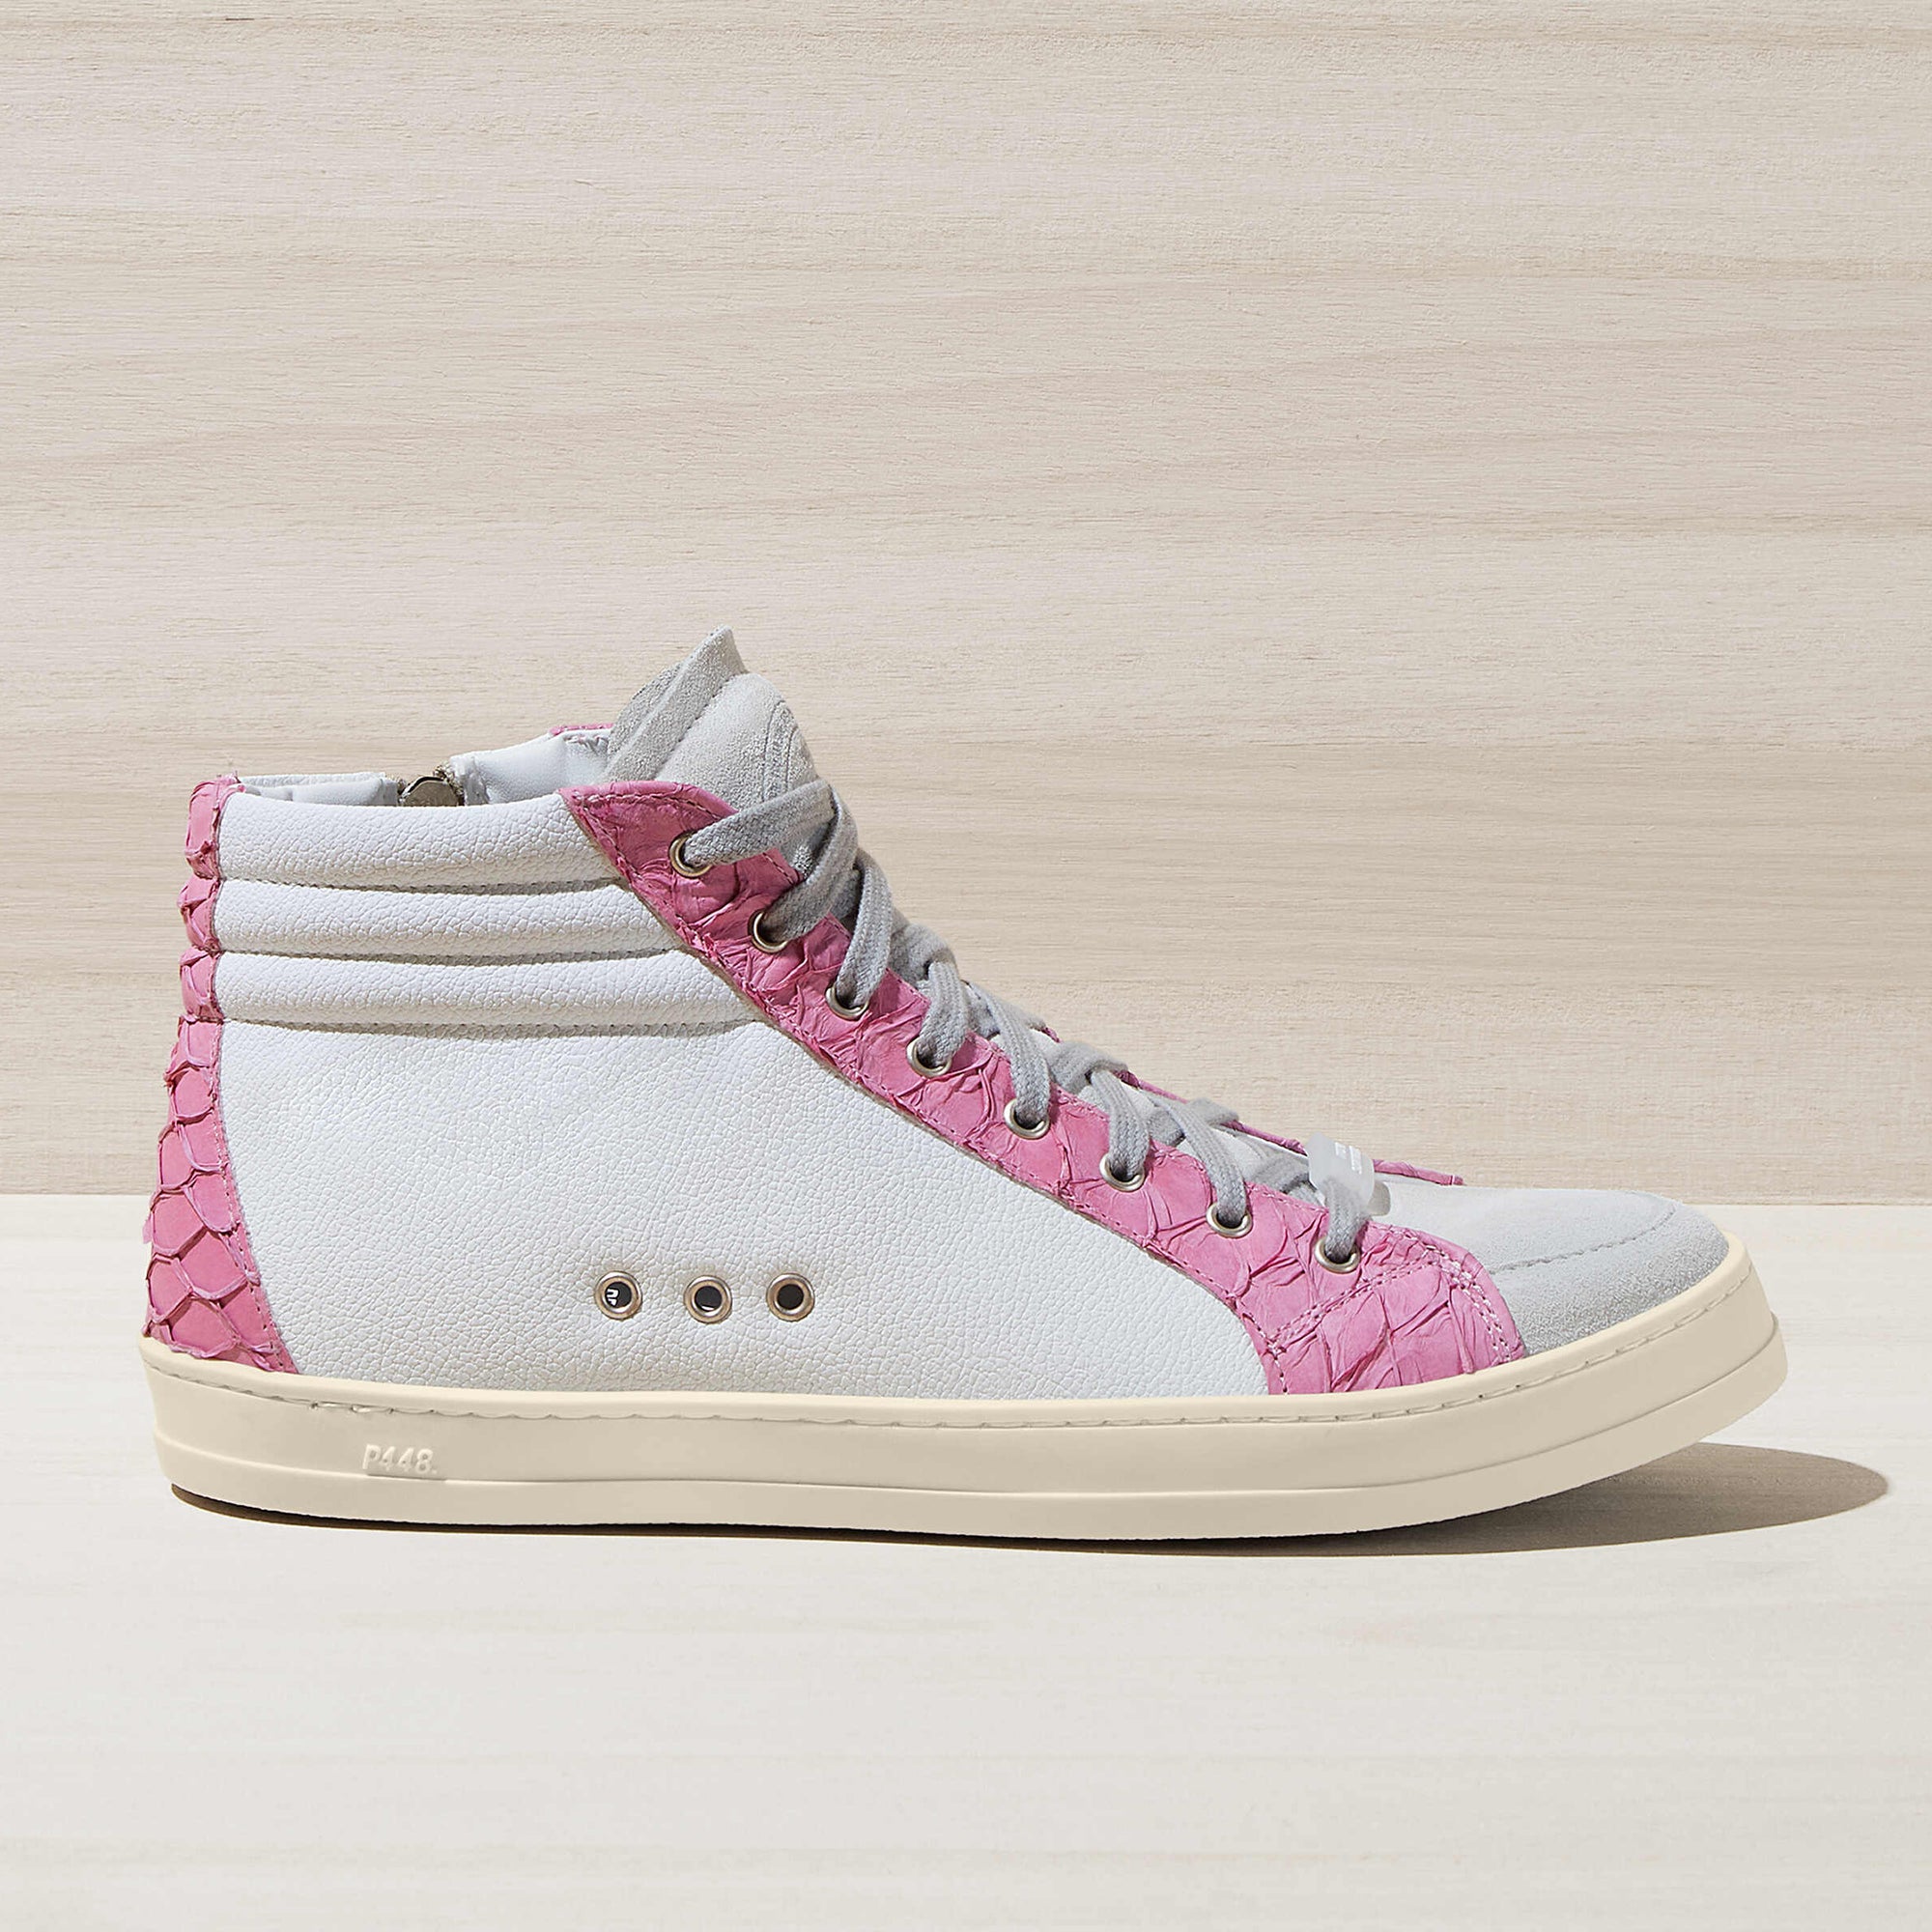 P448 Bali Sherpa High Sneakers | Anthropologie Japan - Women's Clothing,  Accessories & Home